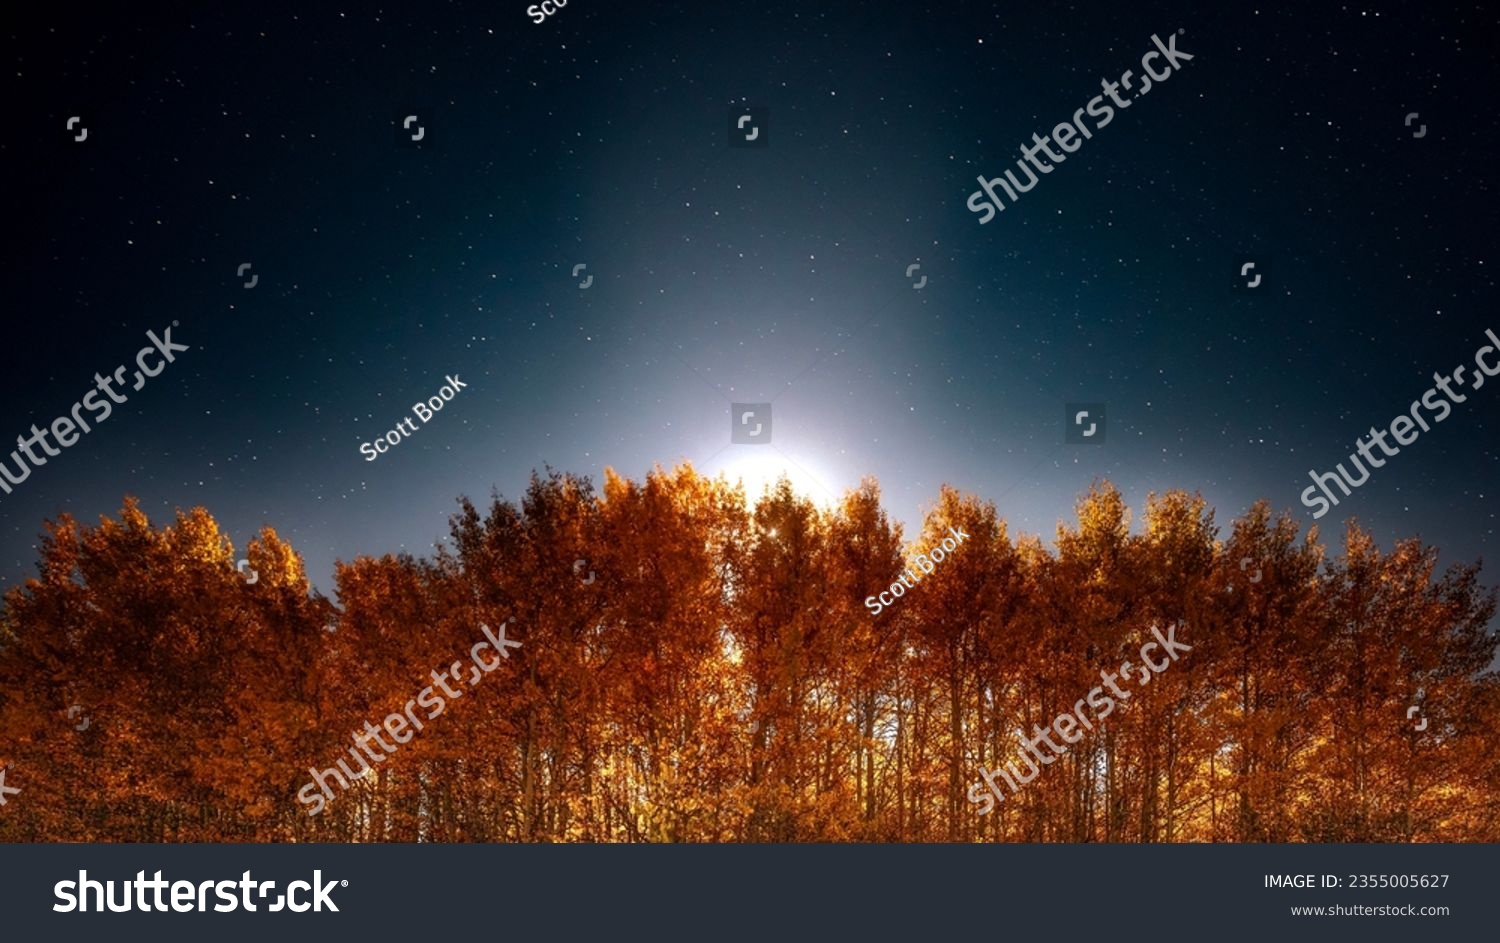 Landscape scene of the moon shining behind a grove of aspen trees at night during the Fall when the leaves are changing. The night sky is full of stars.  #2355005627